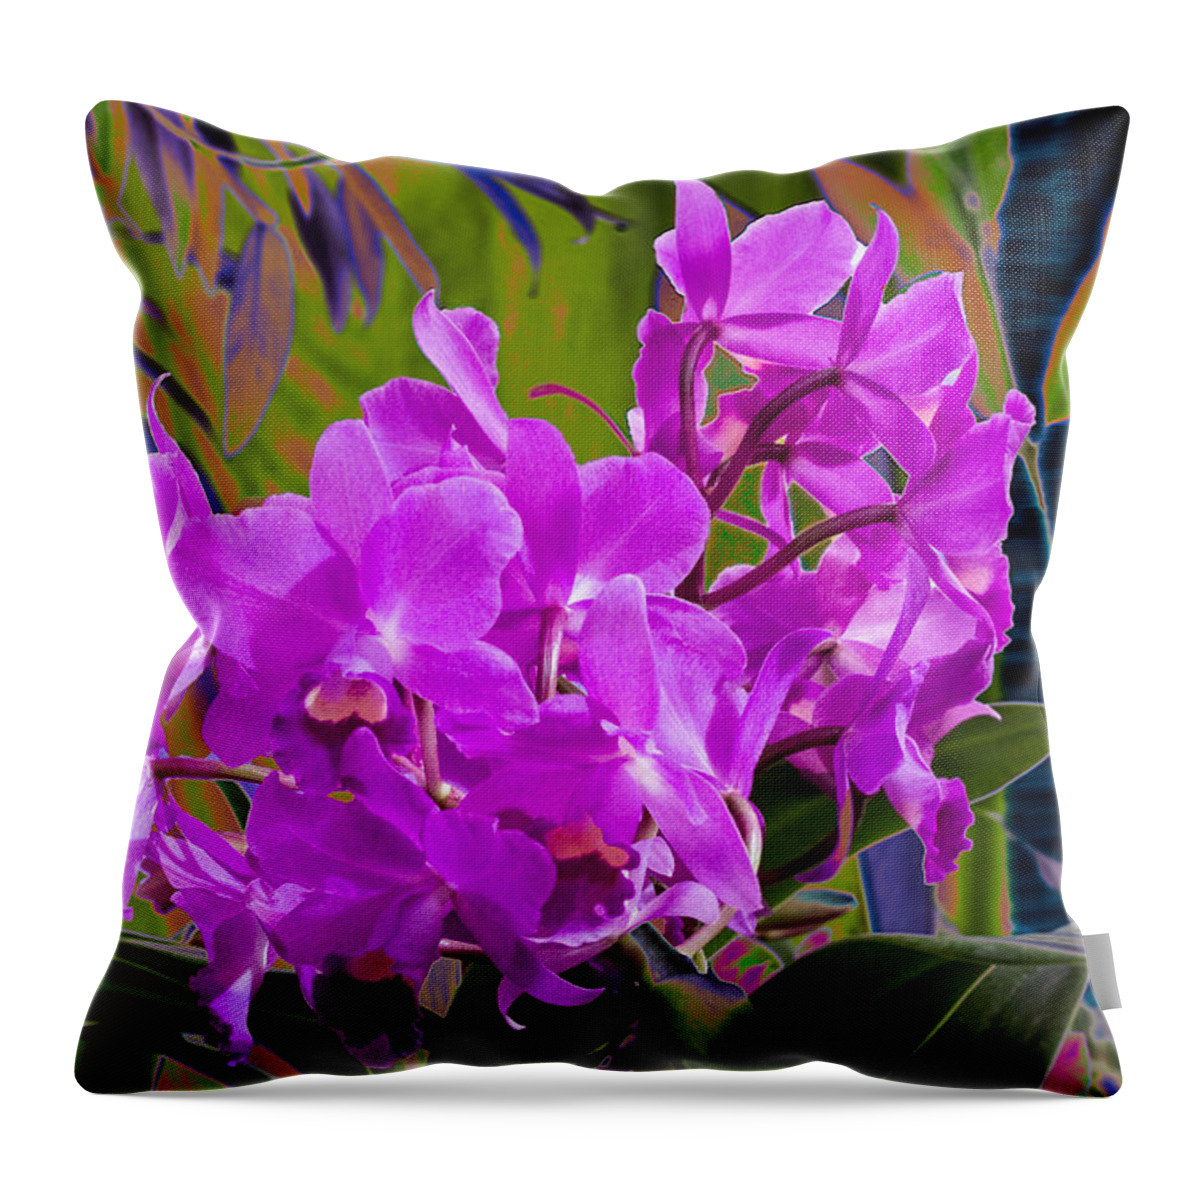 Selby Gardens Throw Pillow featuring the photograph Orchids by Richard Goldman